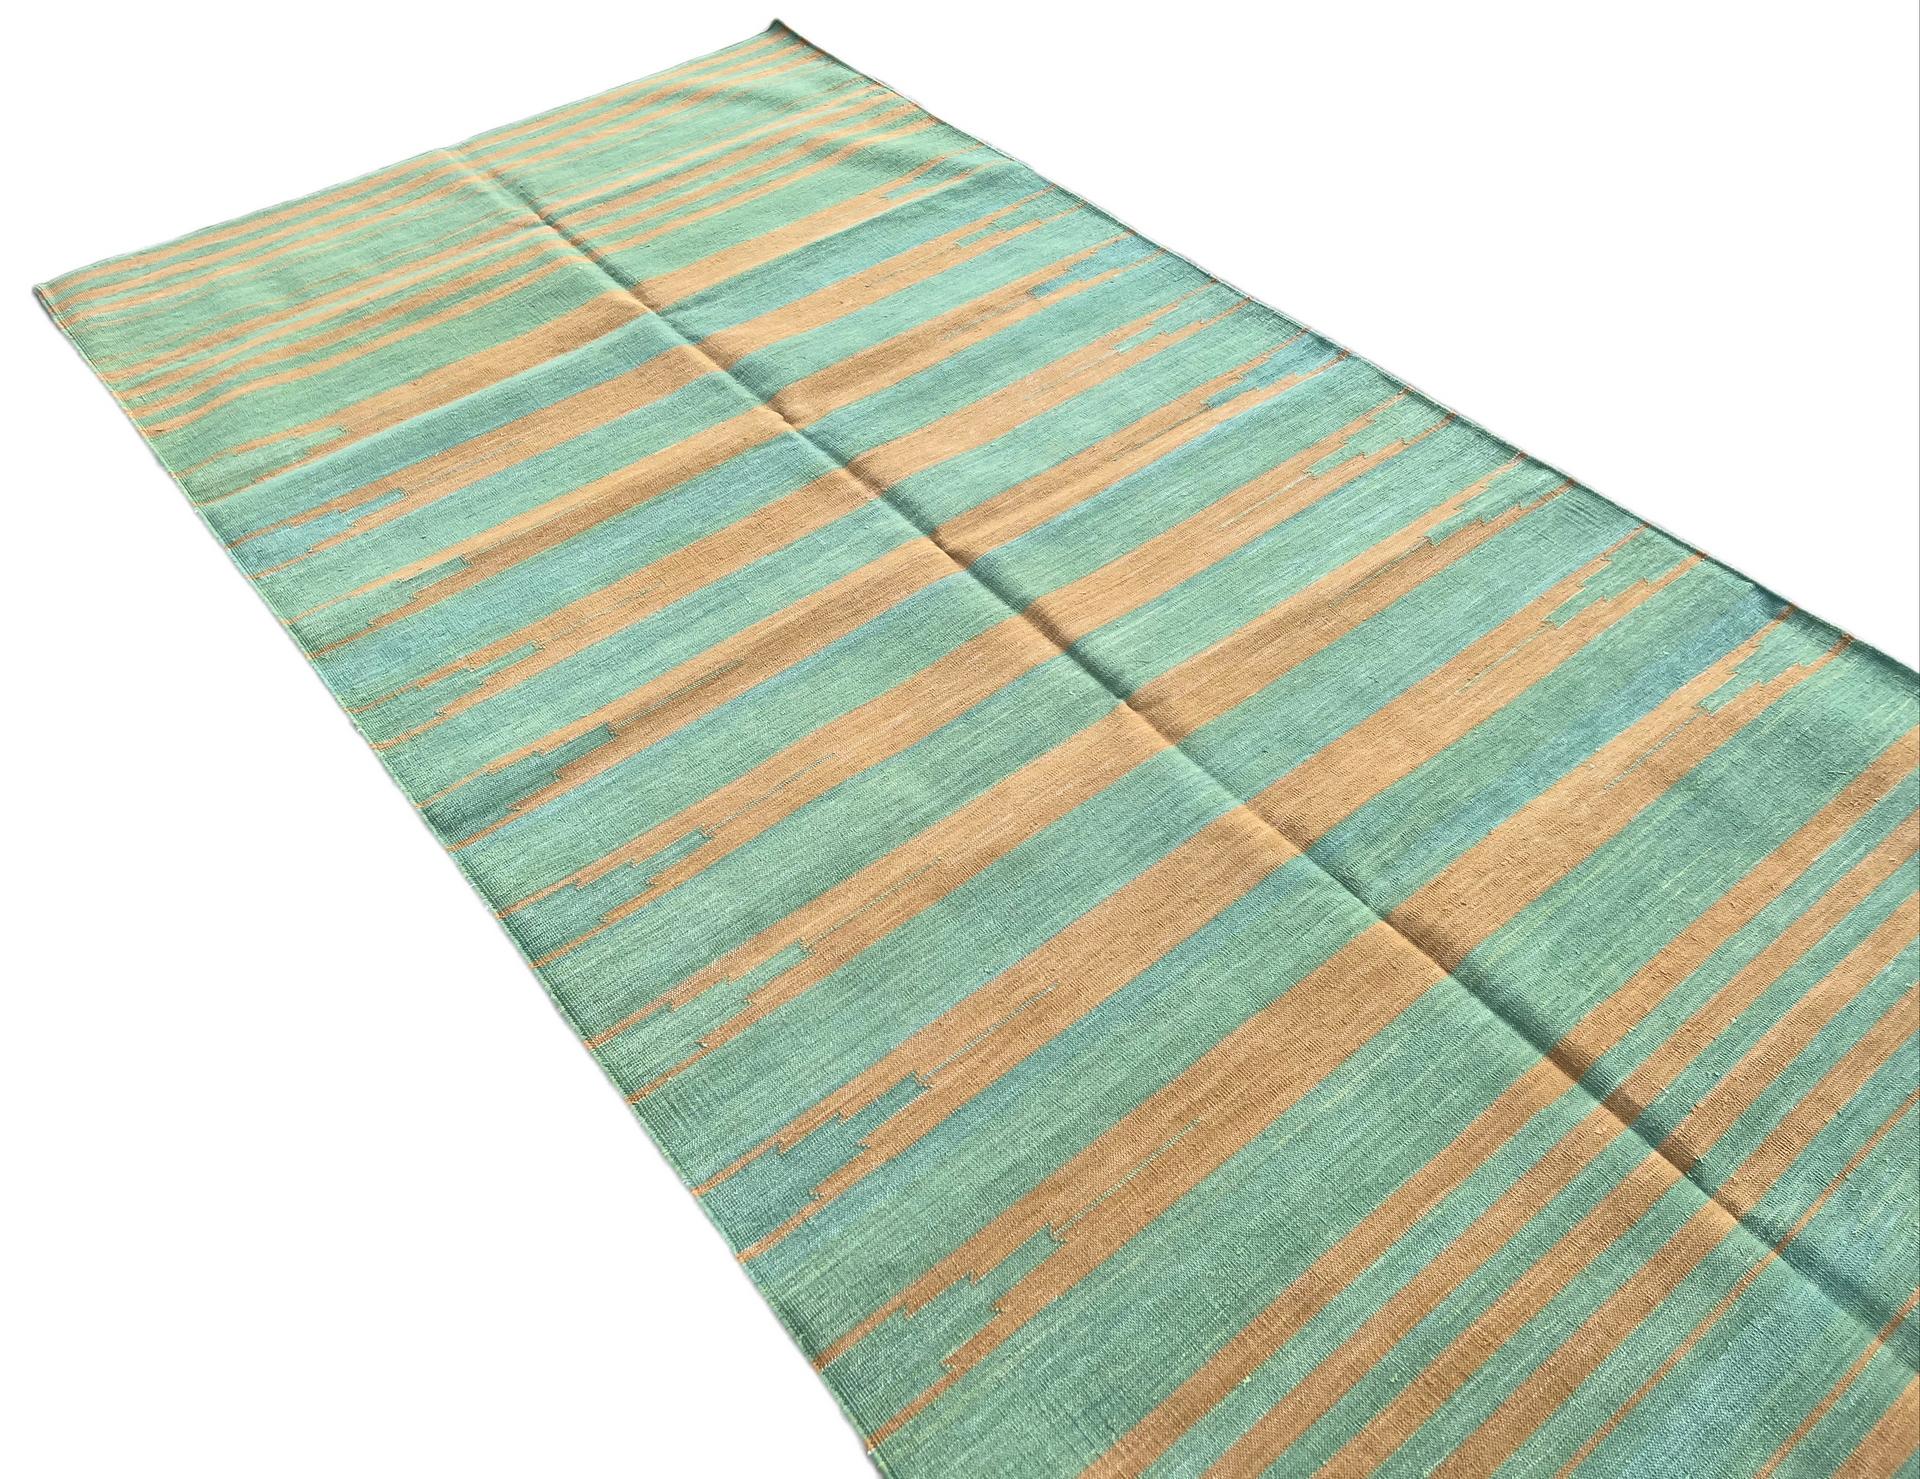 Hand-Woven Handmade Cotton Area Flat Weave Rug, 5x8 Green And Mustard Stripe Indian Dhurrie For Sale